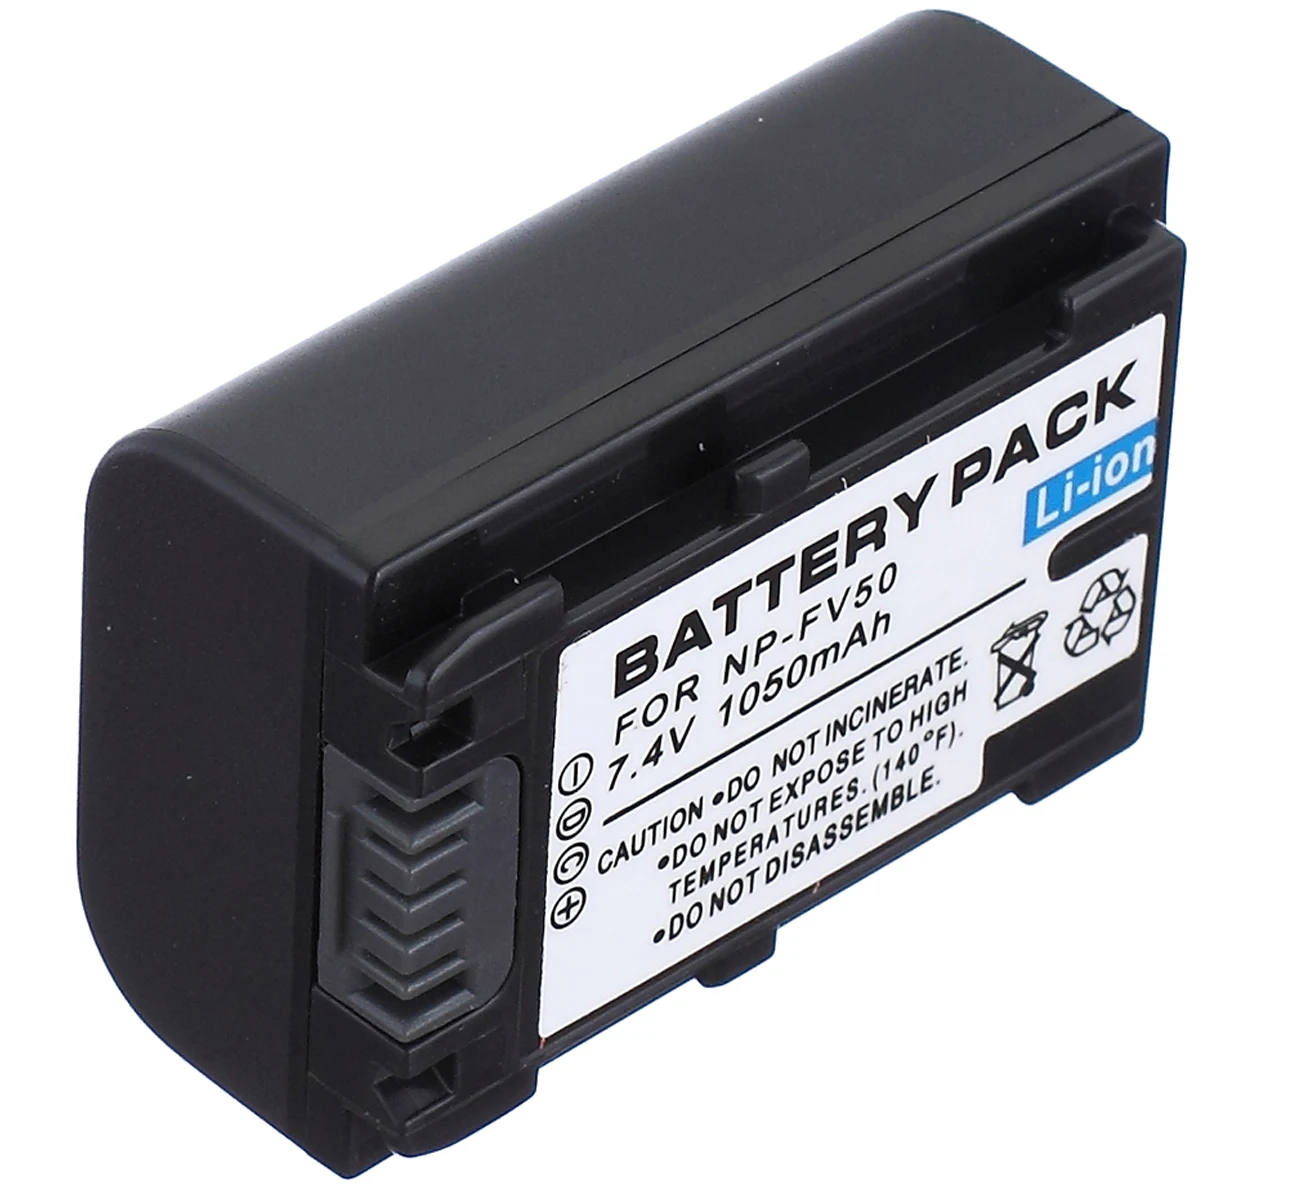 Battery Pack for Sony HDR-CX250E HDR-CX290E Handycam Camcorder HDR-CX260VE HDR-CX270VE HDR-CX280E